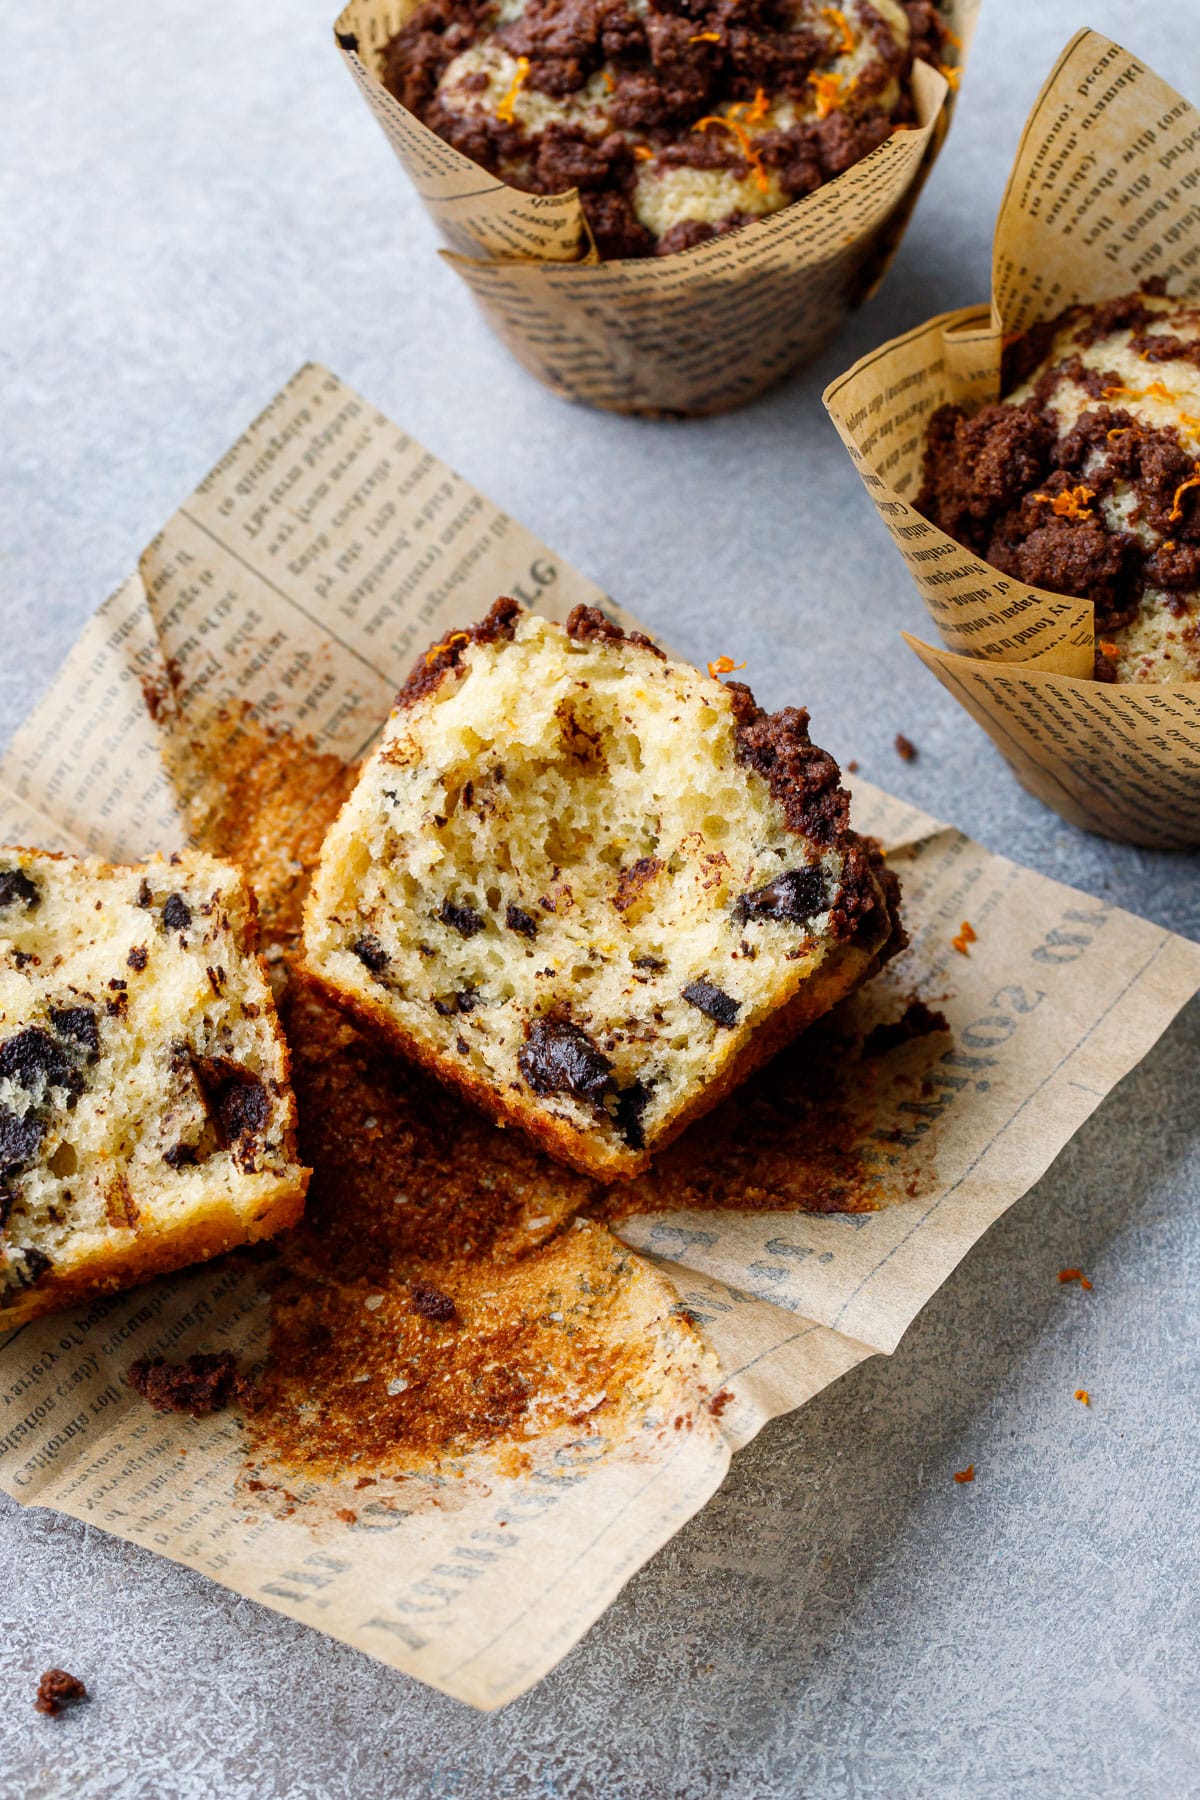 Chocolate Orange Streusel Muffin broken in half to show the tender texture and chocolate chunks inside.